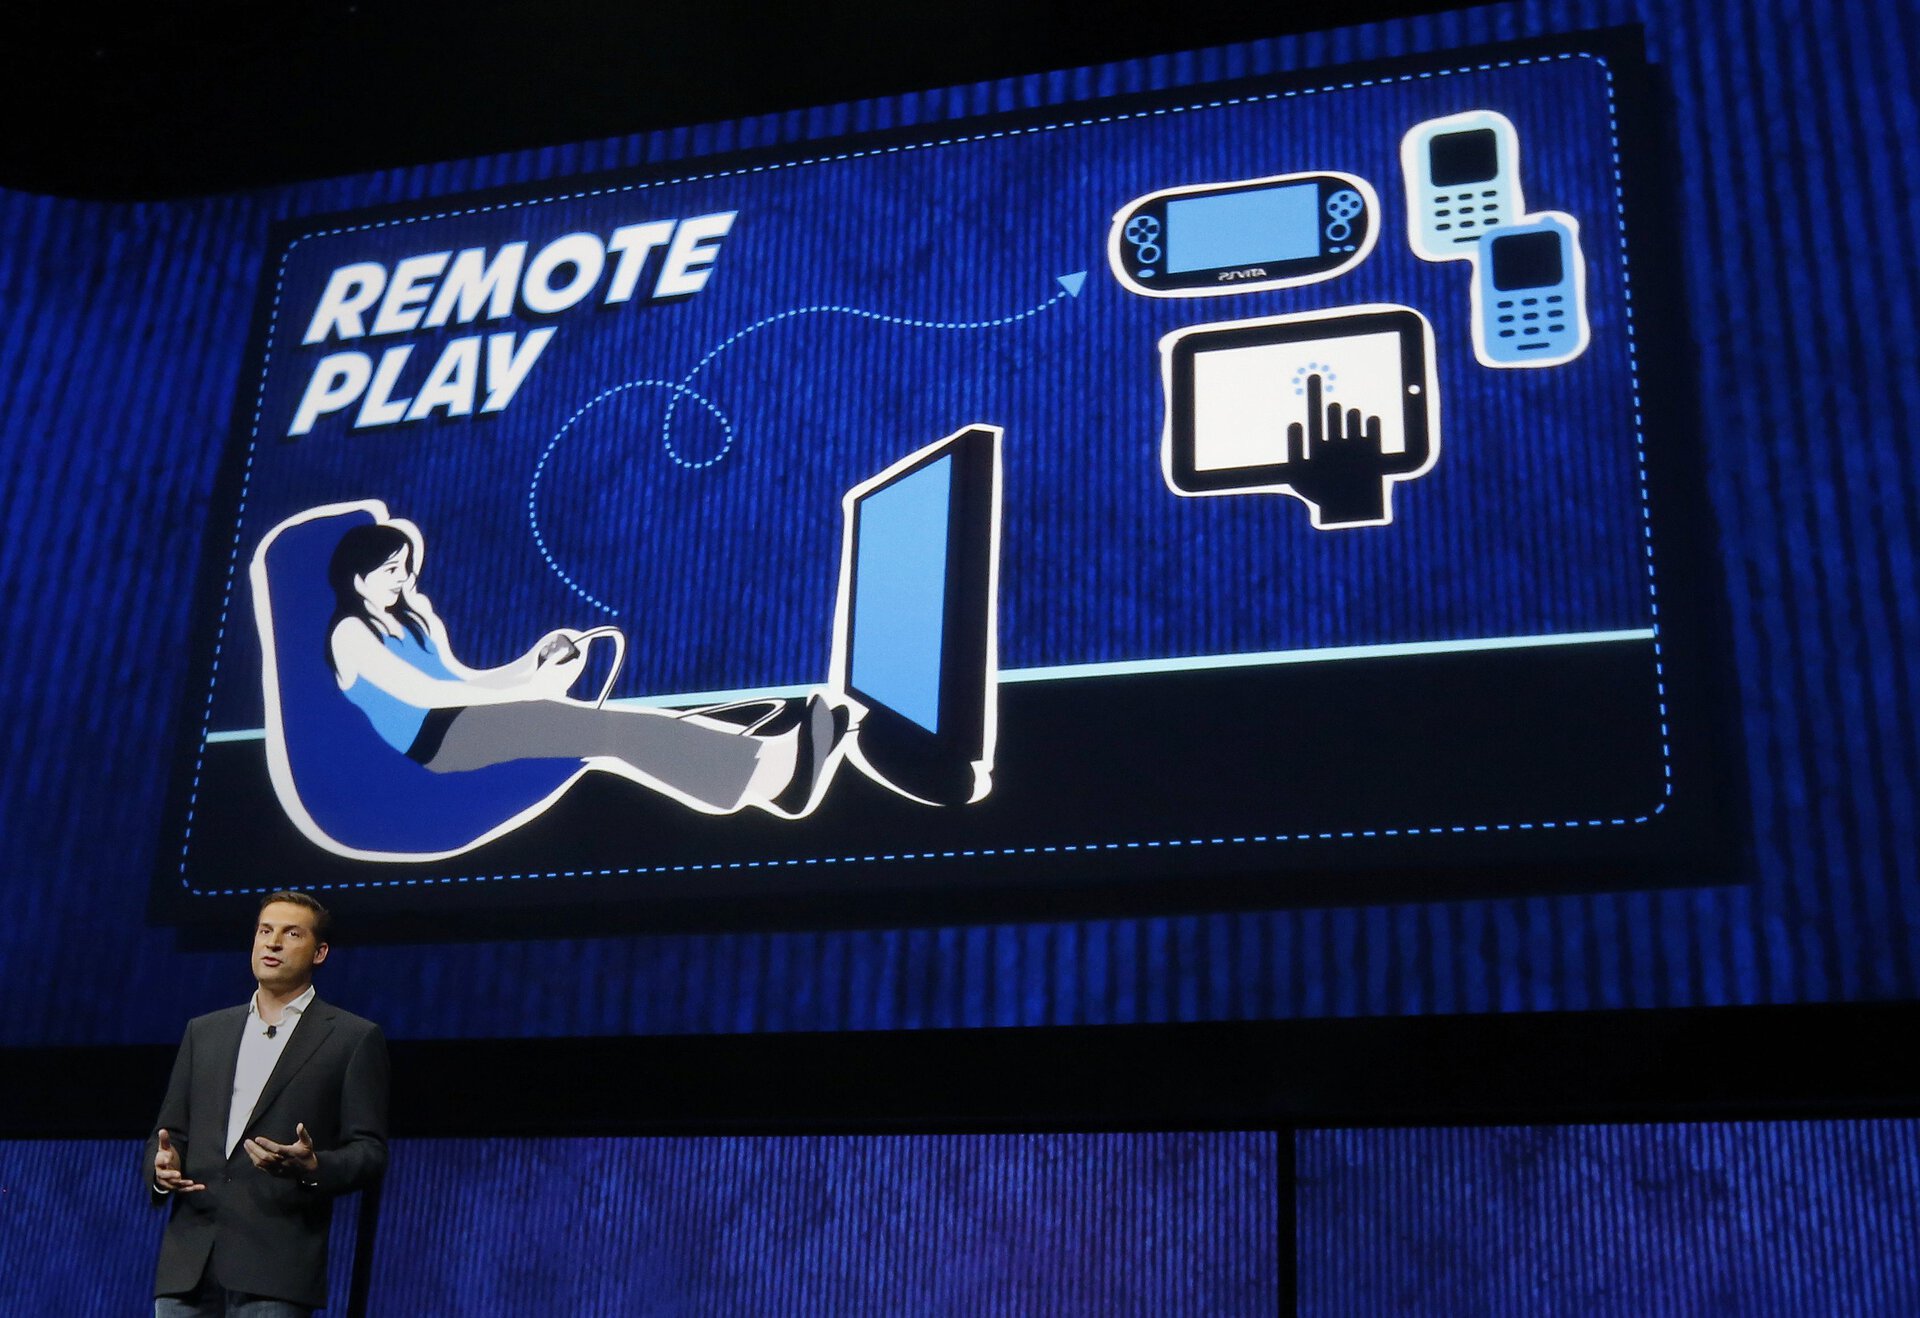 PS4RemotePlayConference